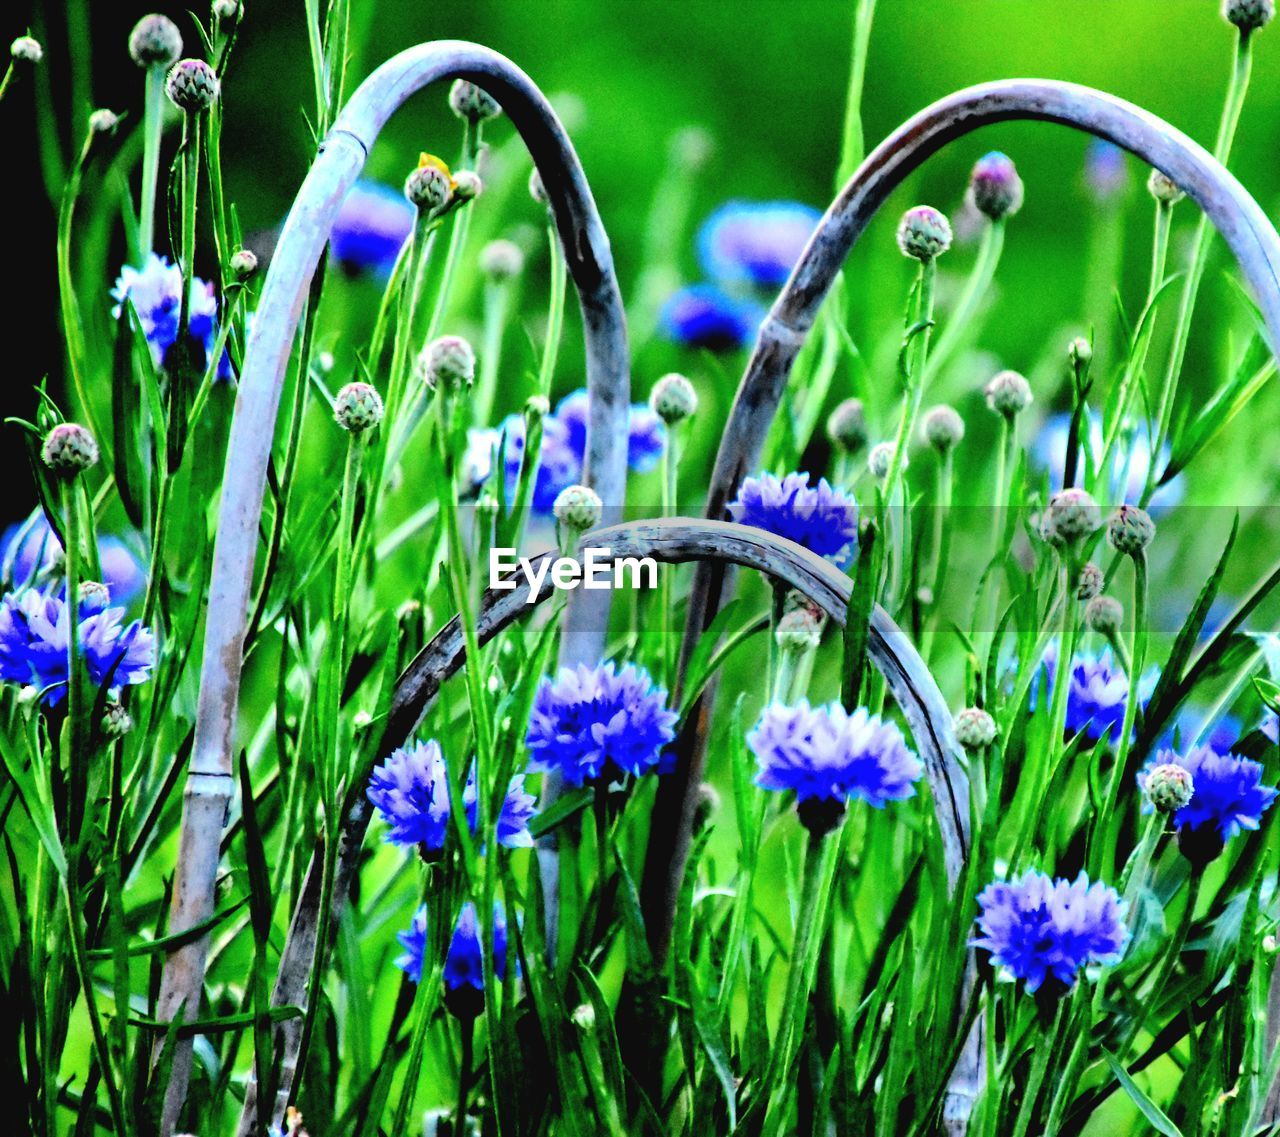 plant, flower, flowering plant, beauty in nature, freshness, purple, nature, growth, grass, meadow, green, fragility, close-up, no people, day, blue, outdoors, petal, plant part, herb, springtime, leaf, botany, inflorescence, iris, flower head, field, focus on foreground, water